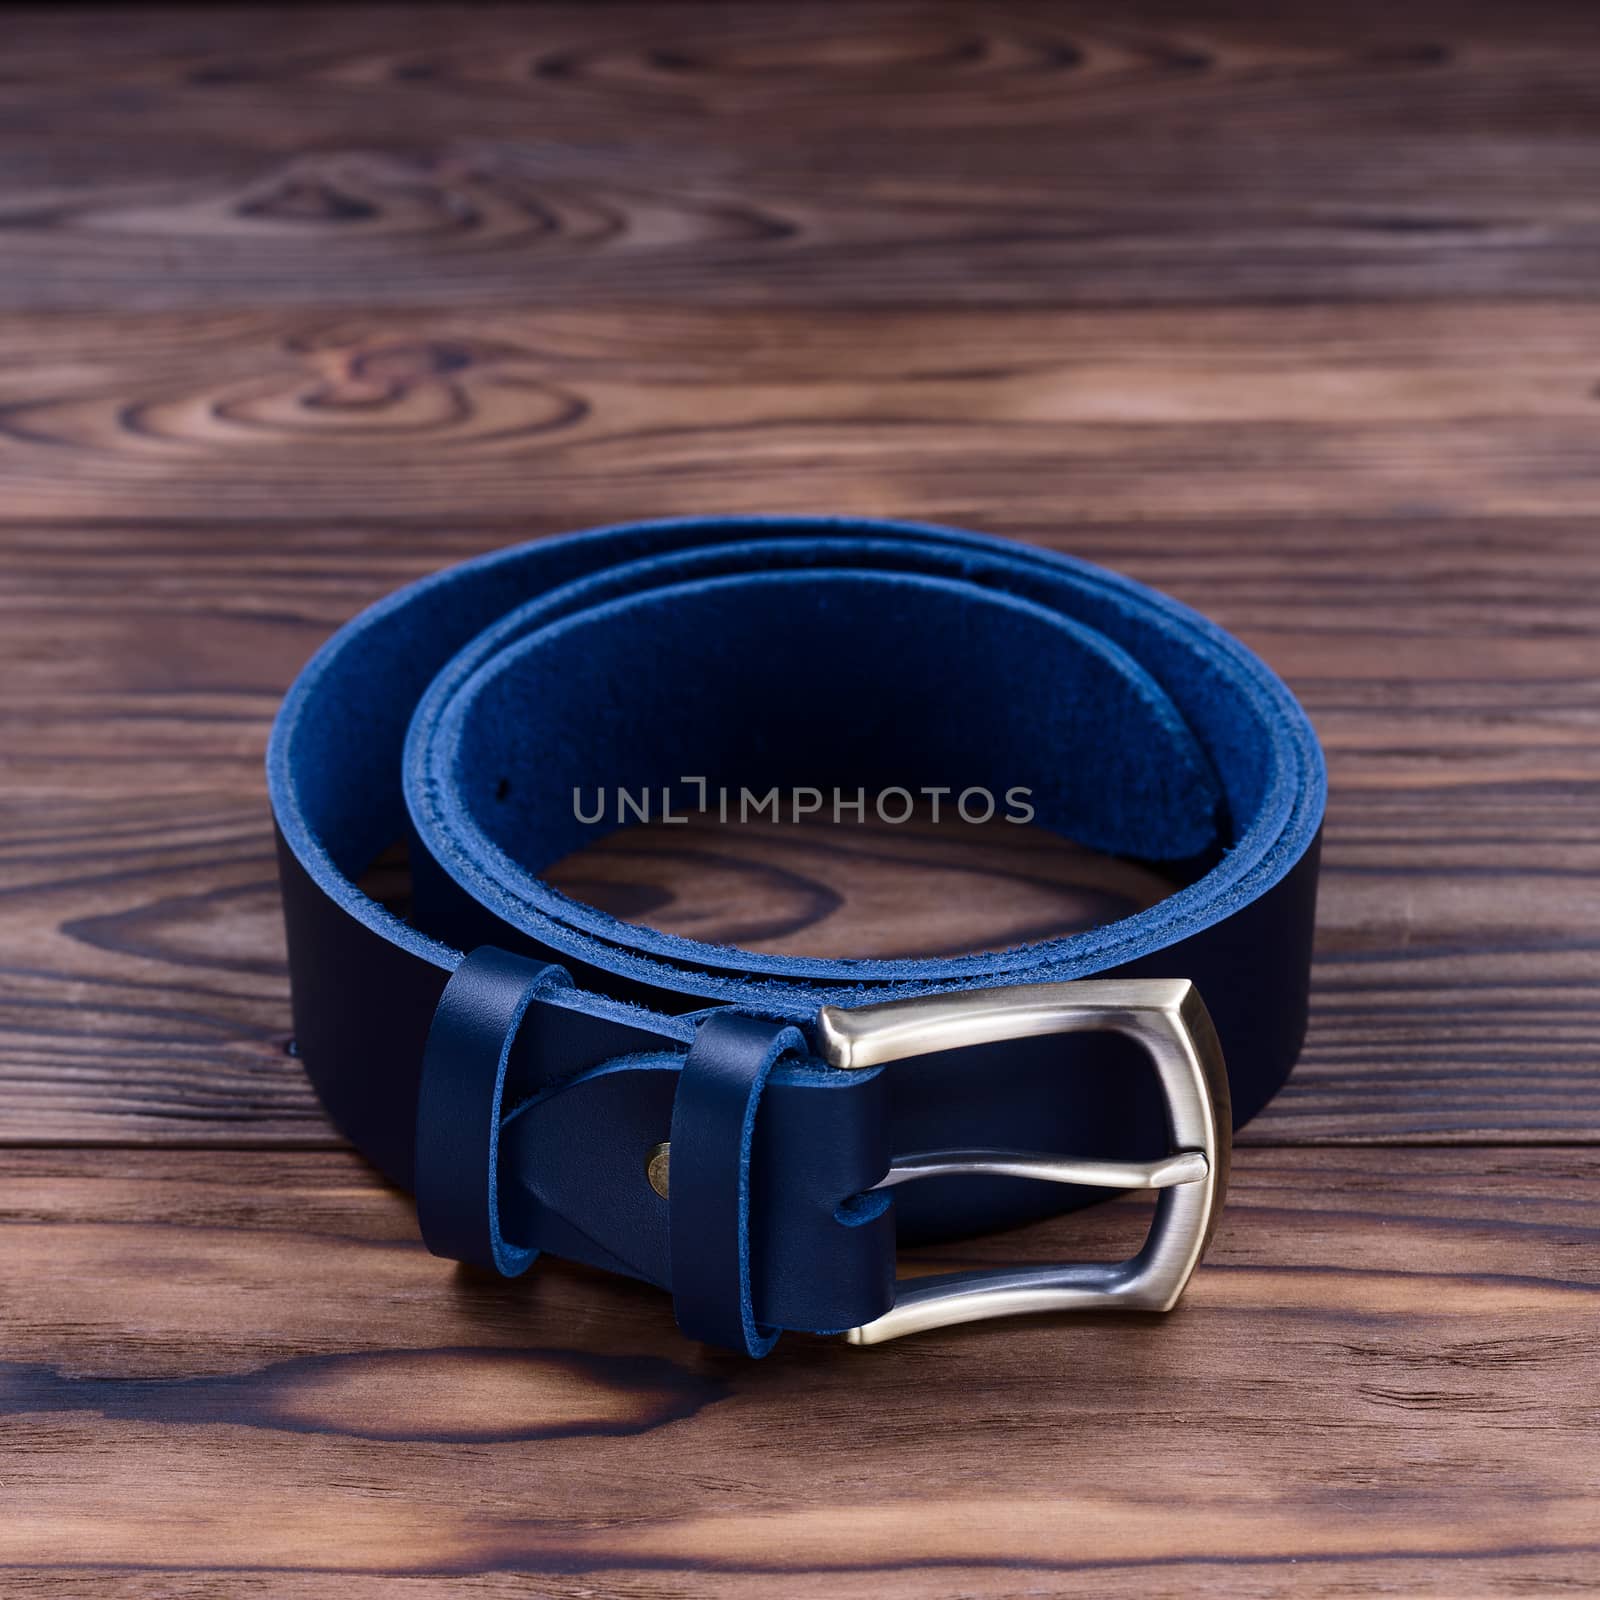 Blue color handmade belt lies on textured wooden background. The belt is twisted into a ring. Closeup side view. Stock photo of businessman accessories.